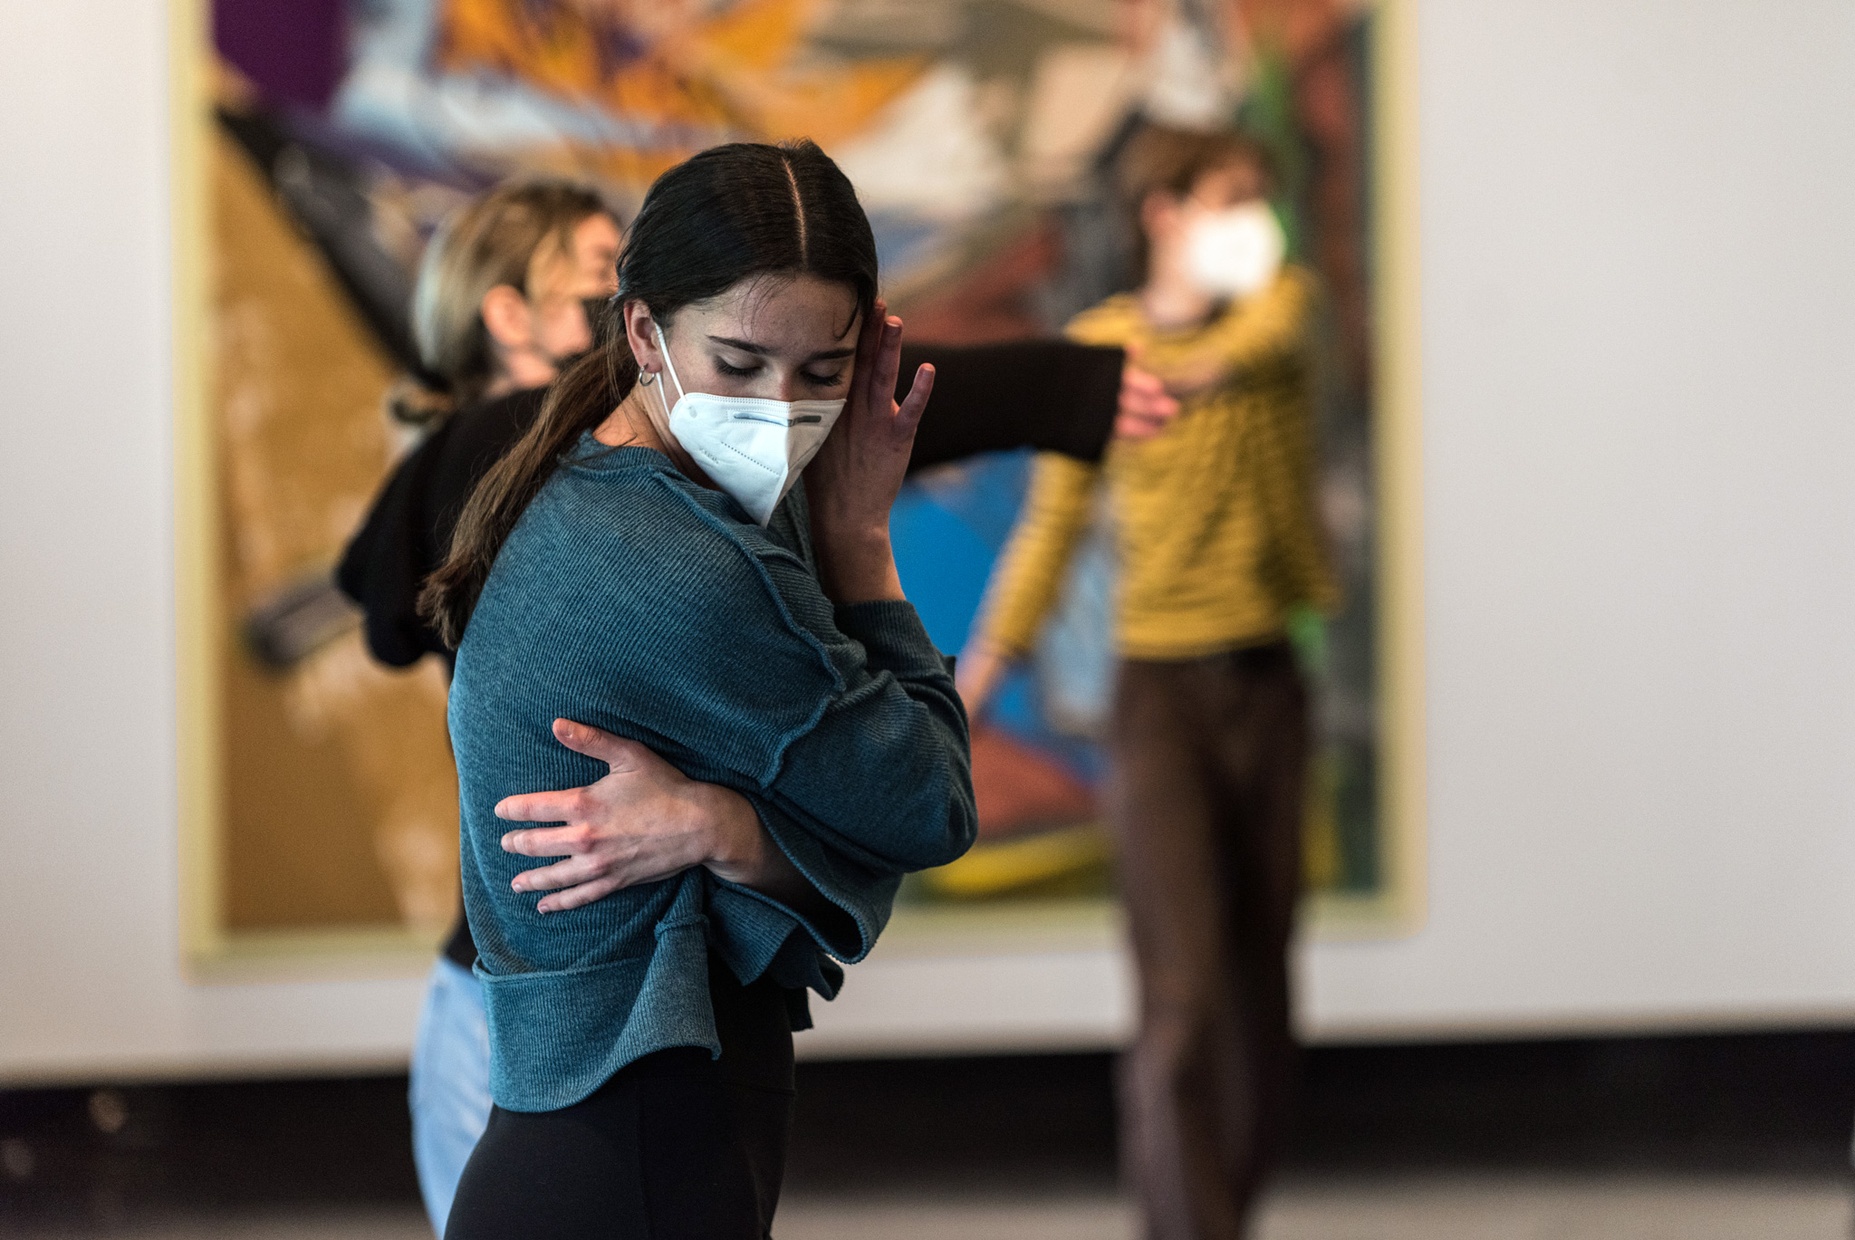 A masked young woman poses while dancing in front of an abstract painting and two other people who are out of focus behind her.